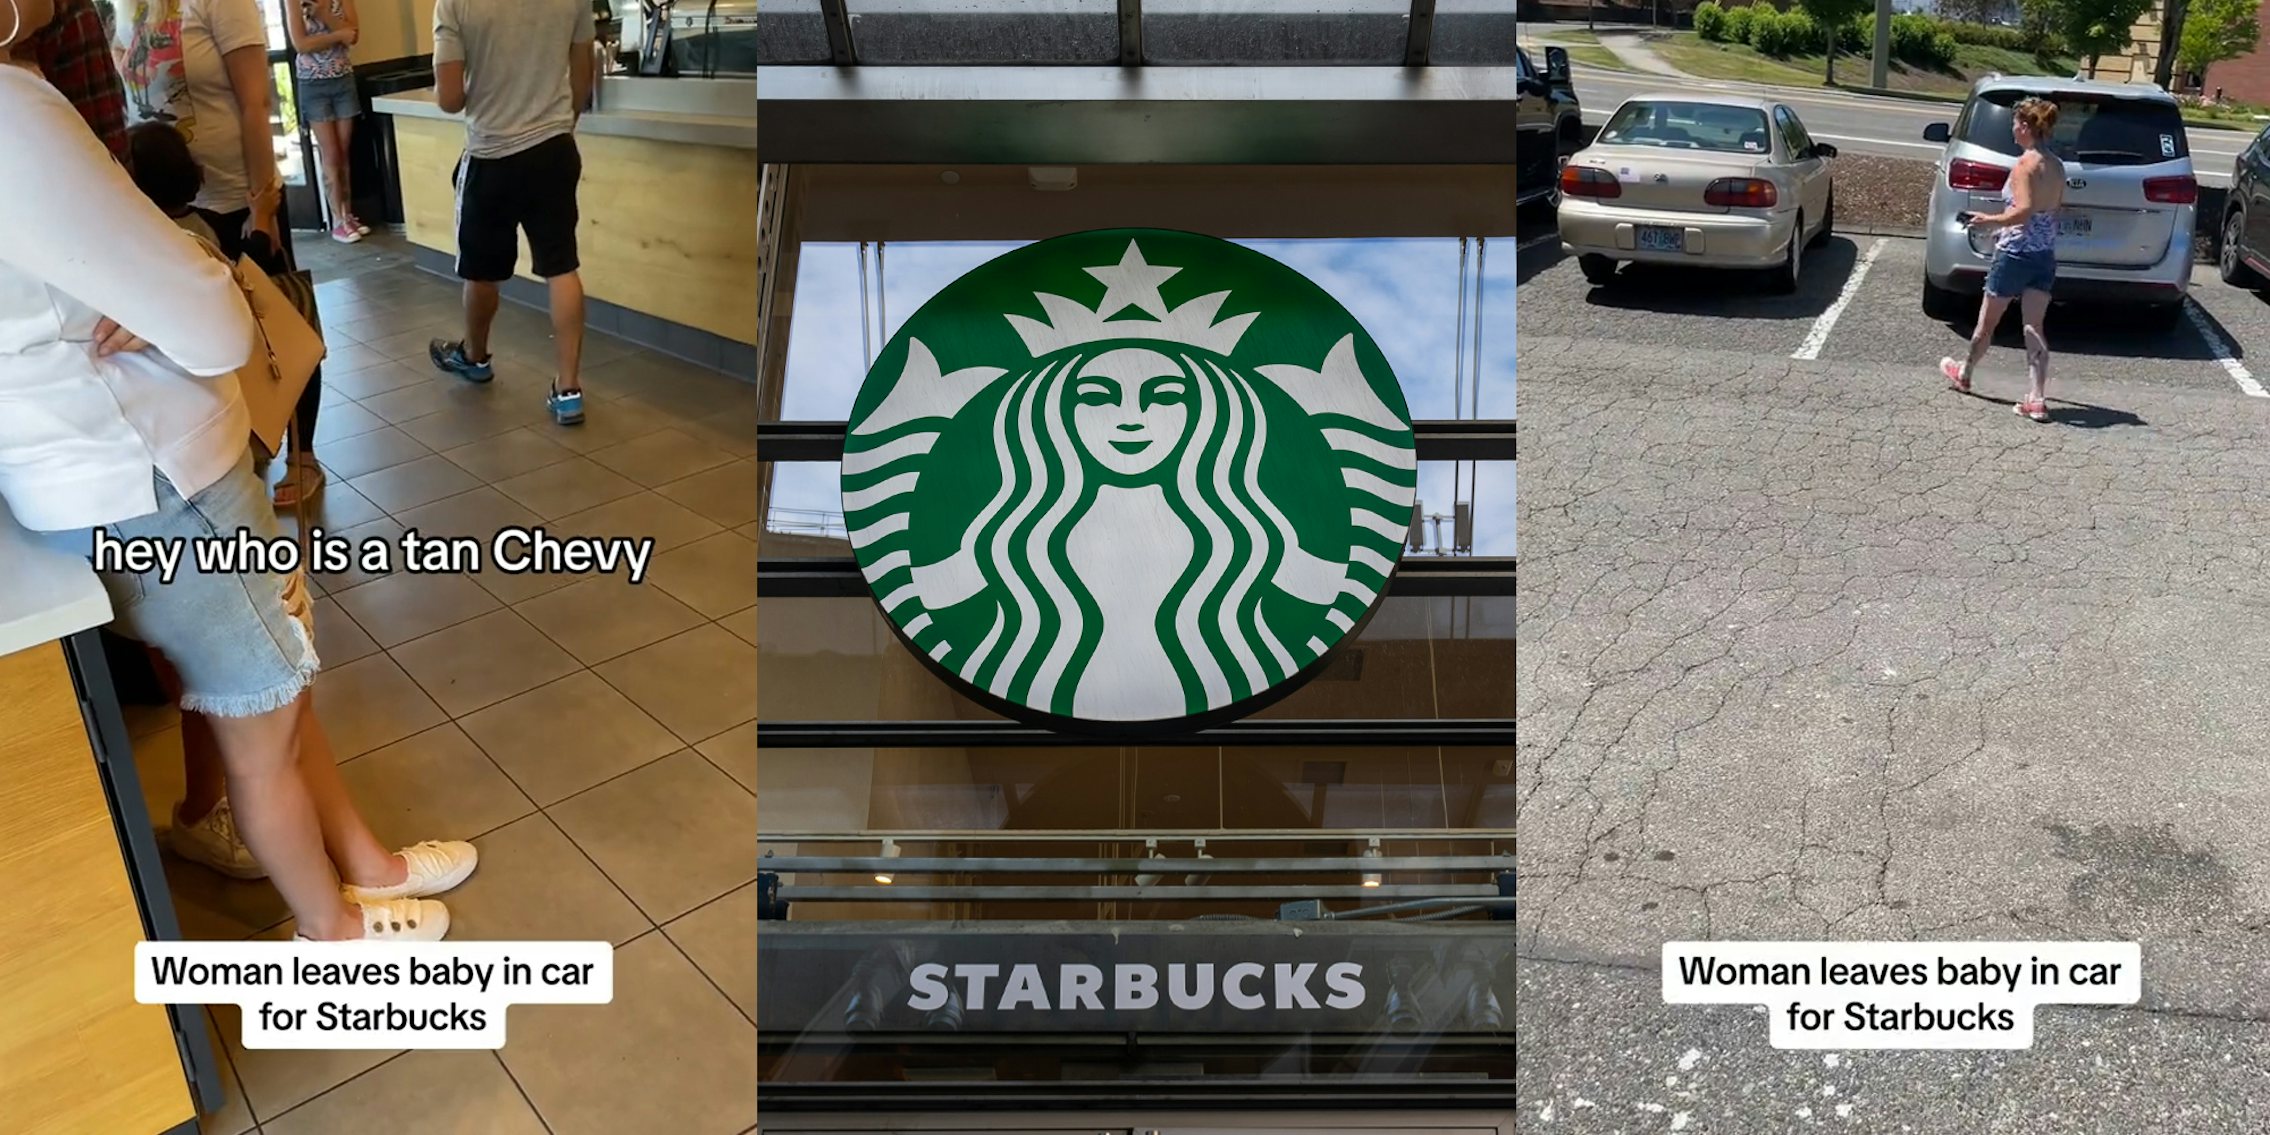 Starbucks customers inside with caption 'hey who is a tan Chevy' 'Woman leaves baby in car for Starbucks' (l) Starbucks signs above door (c) woman walking in Starbucks parking lot with caption 'Woman leaves baby in car for Starbucks' (r)